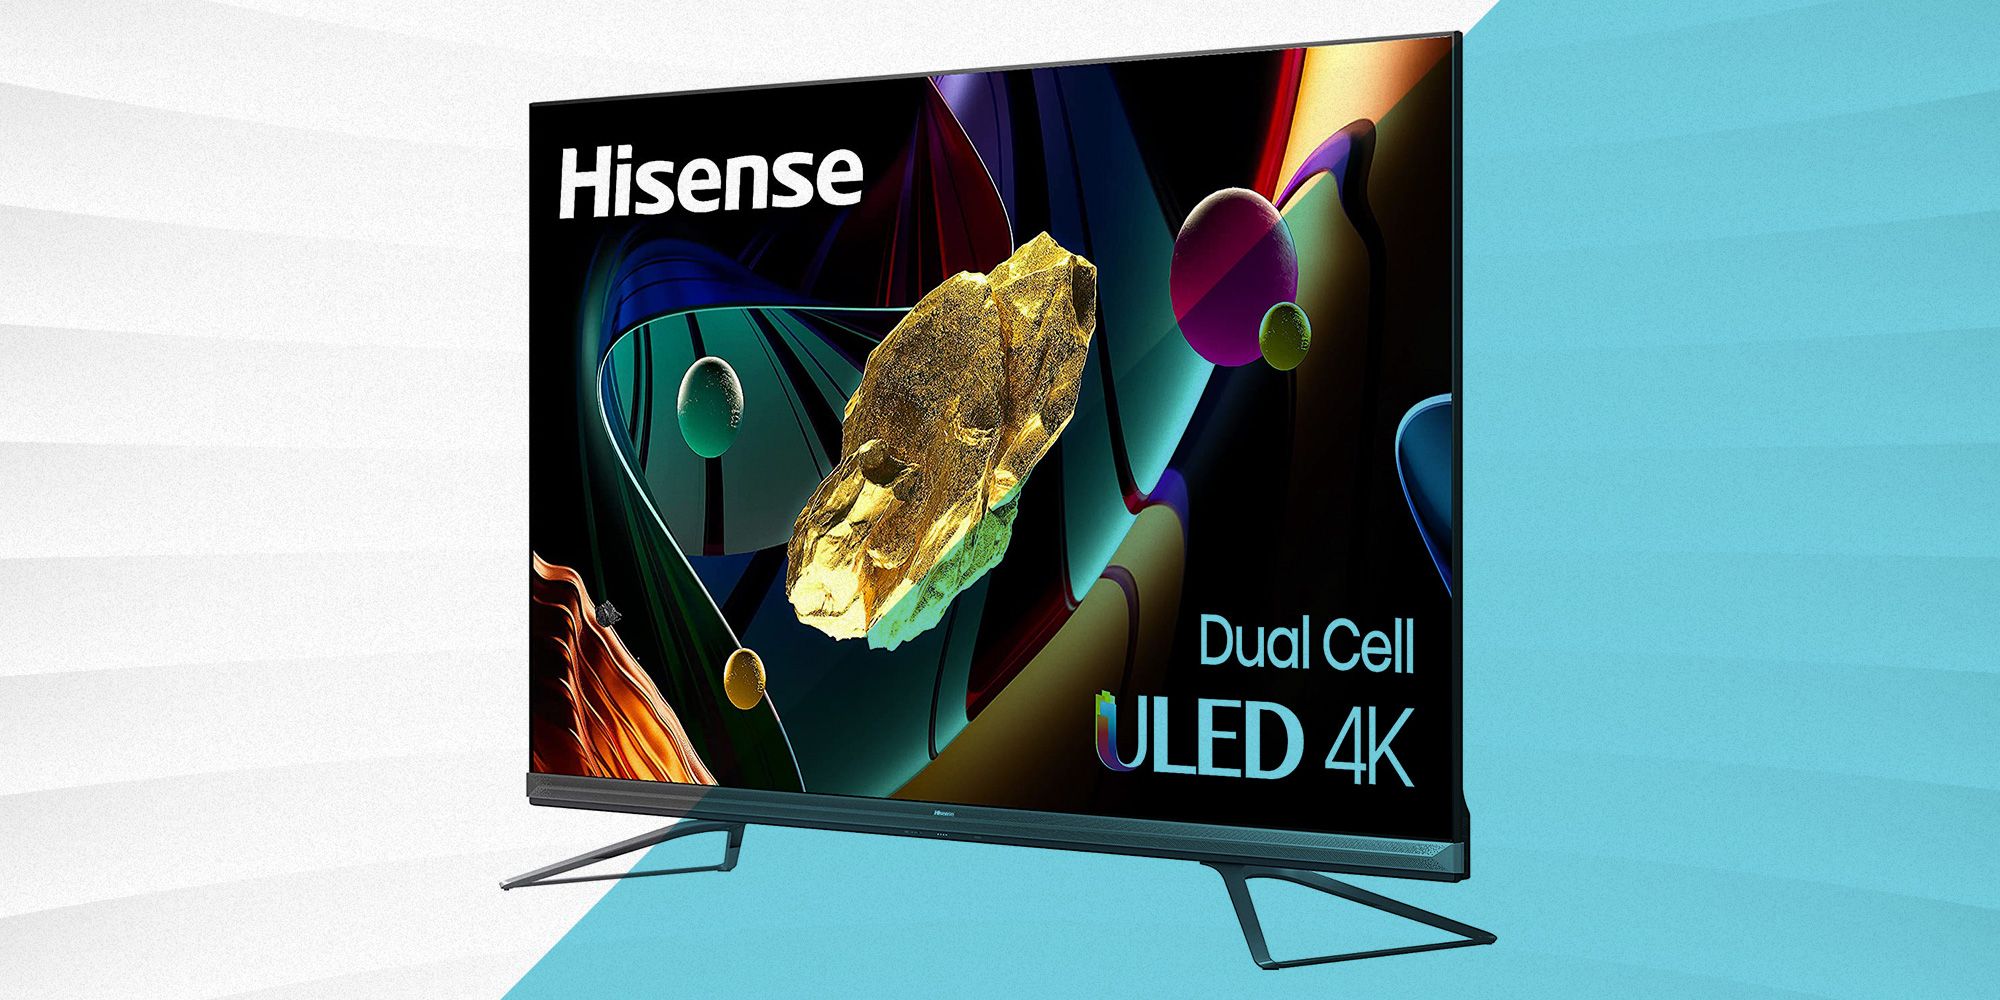 Hisense Reveals 100-Inch TV for $3,000, Just in Time for the Big